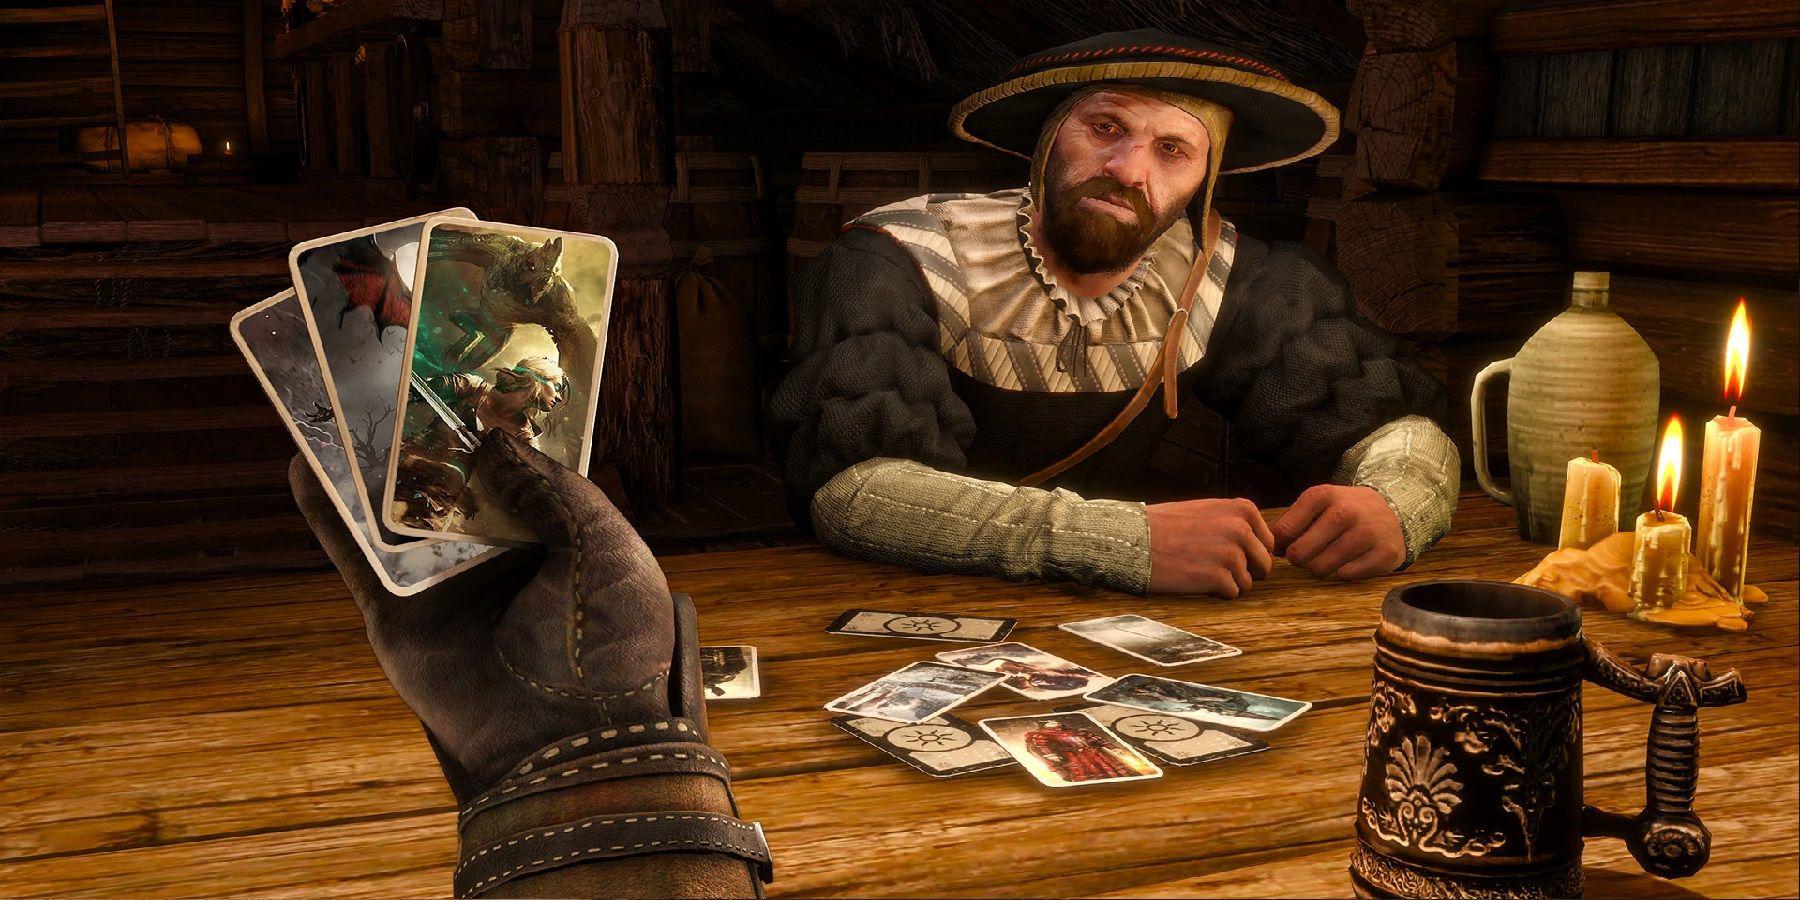 The Witcher 3: Como obter todas as cartas DLC Gwent (Deck Skellige/Hearts Of Stone)